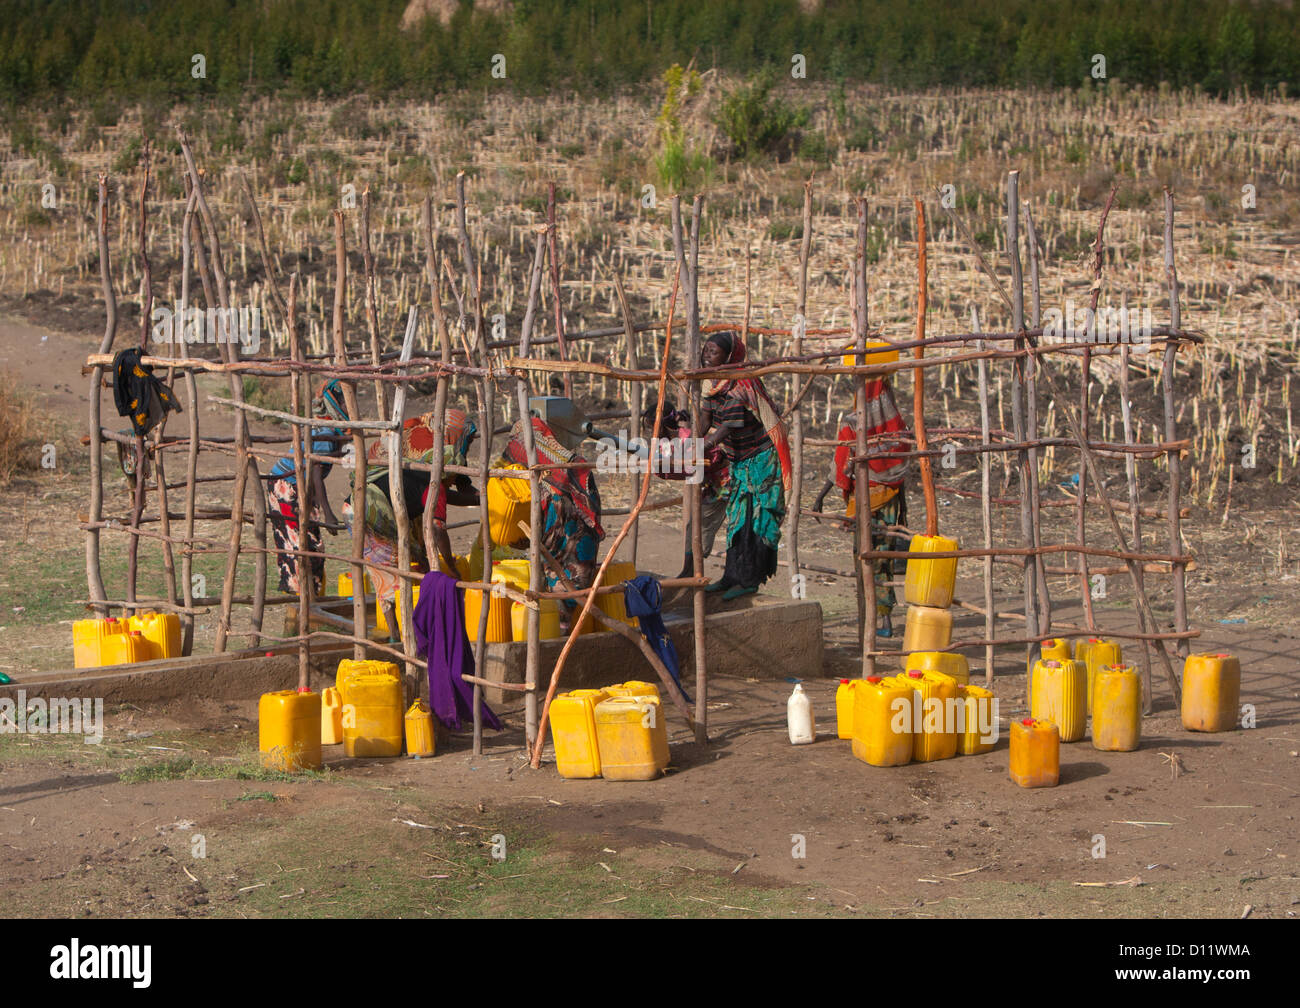 Women Pumping At Water Well In Dire Dawa, Ethiopia Stock Photo